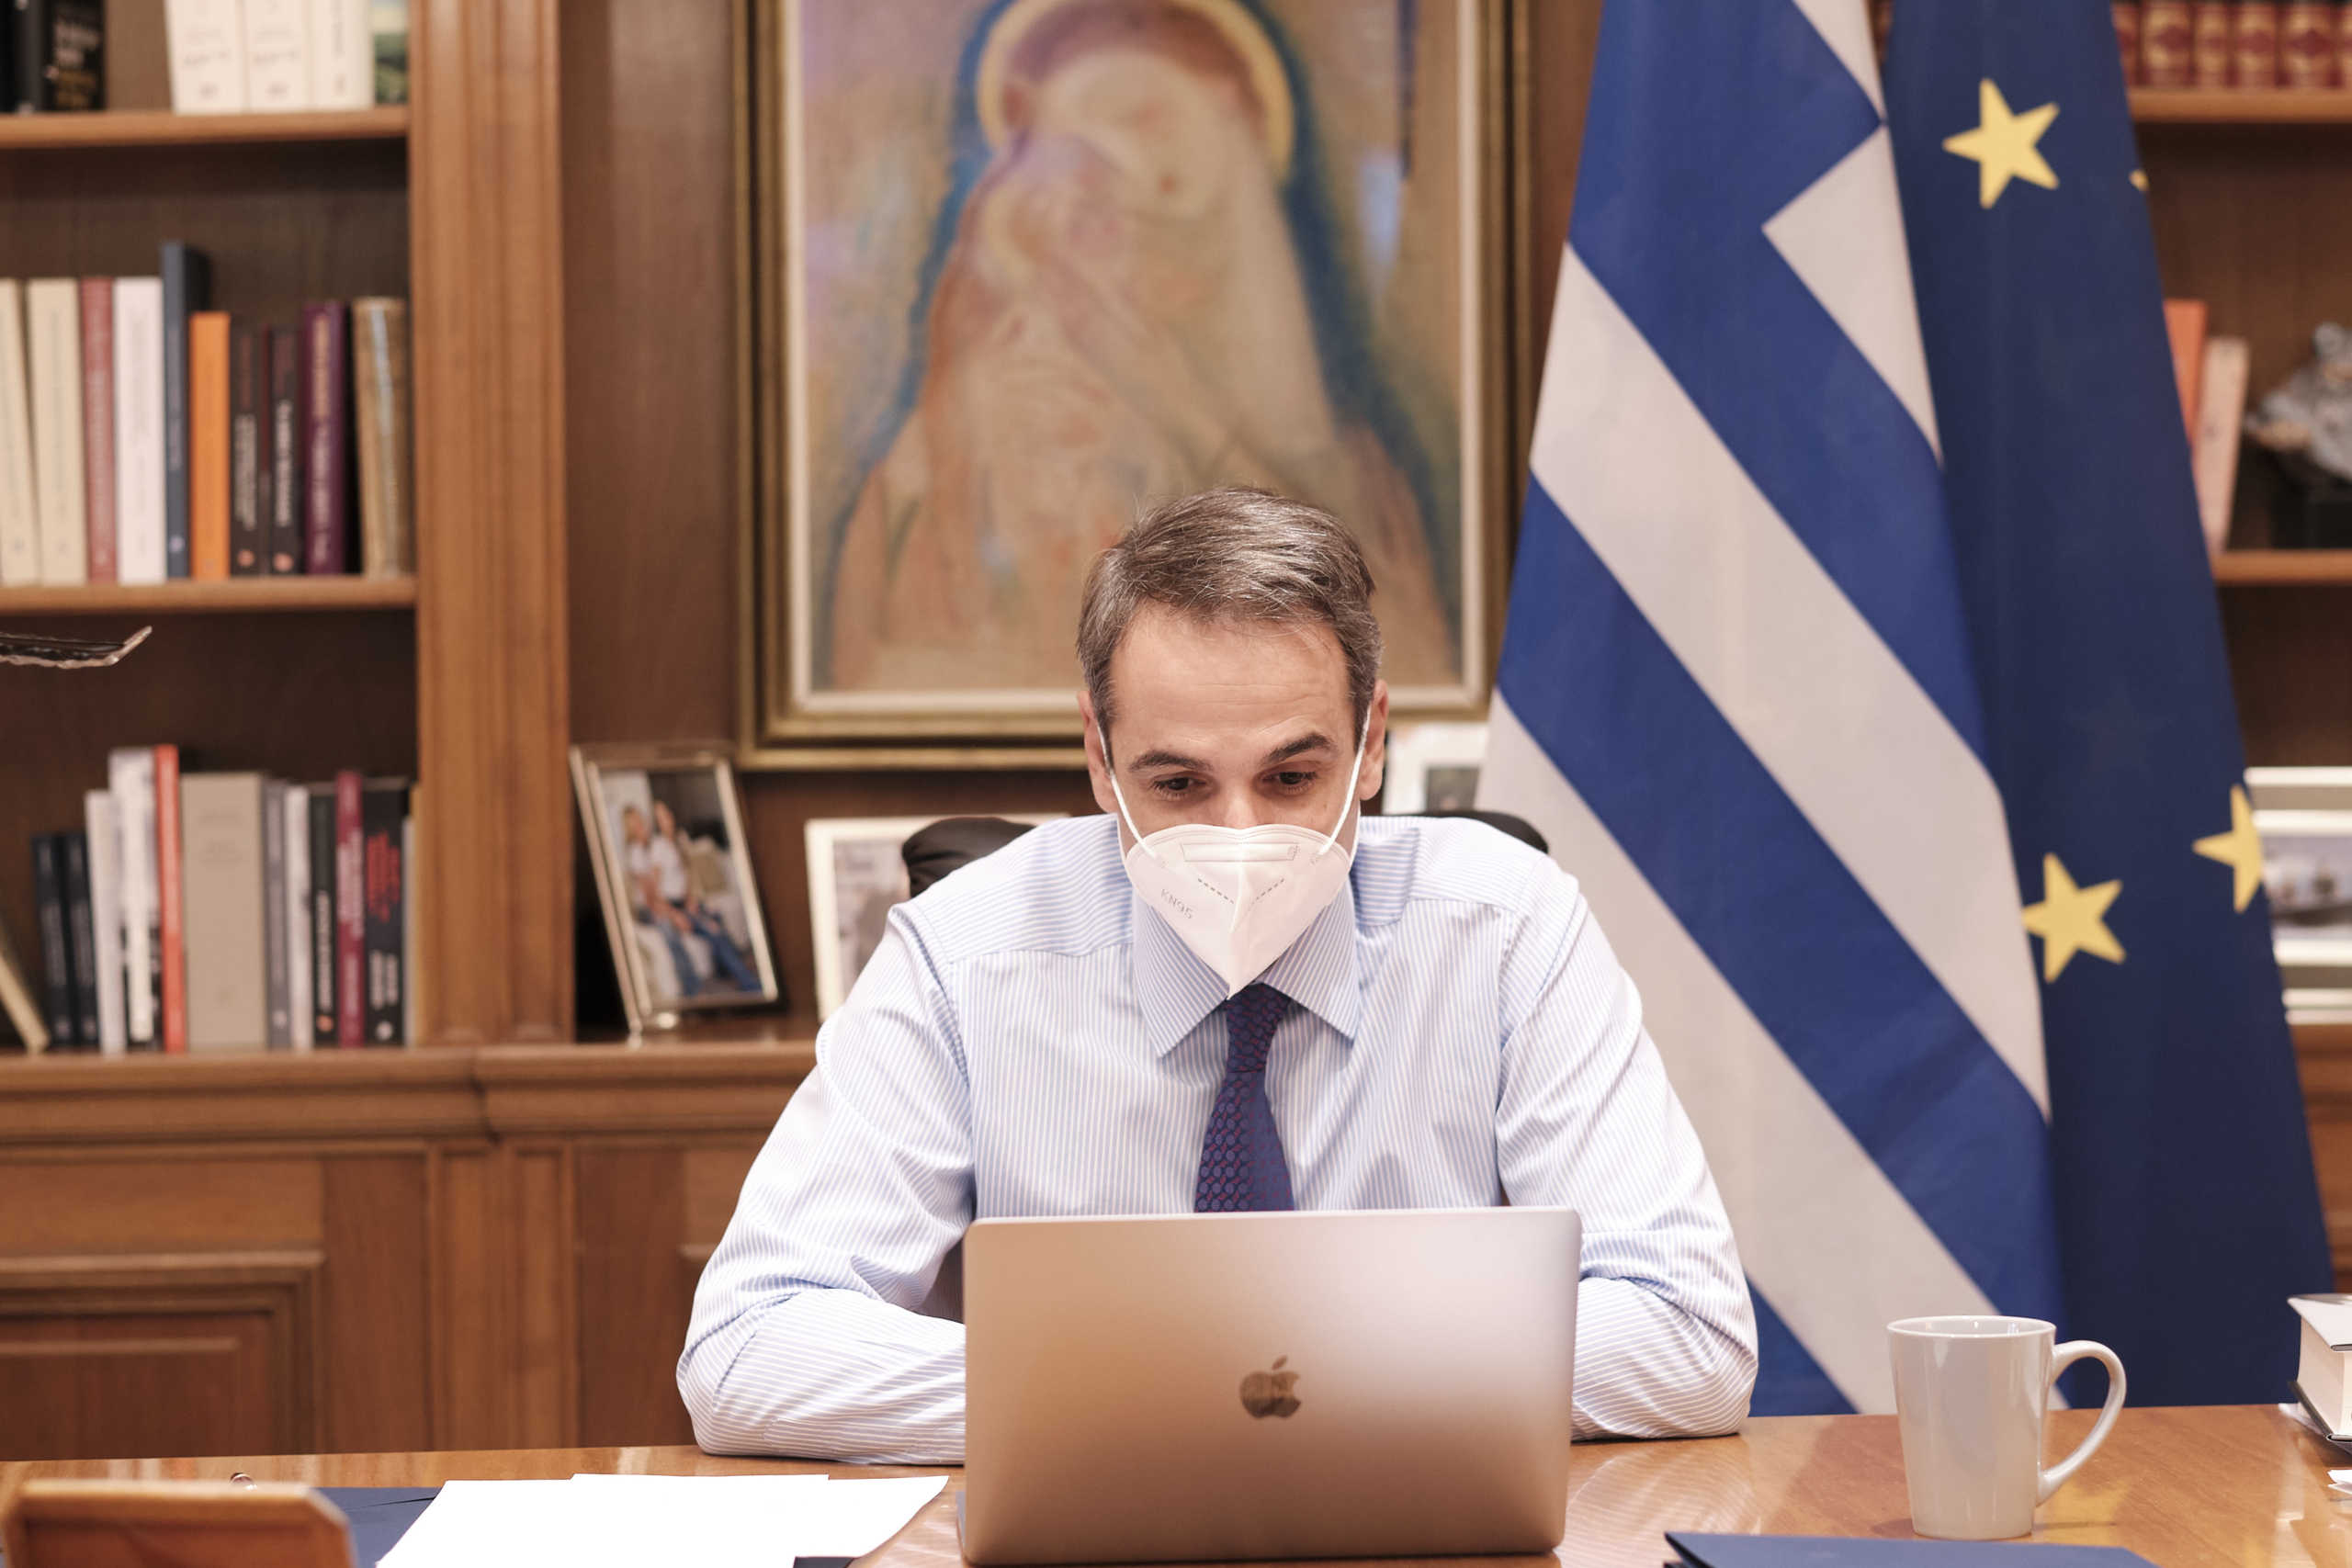 Kyriakos Mitsotakis: The family photo he uploaded for New Year’s Day